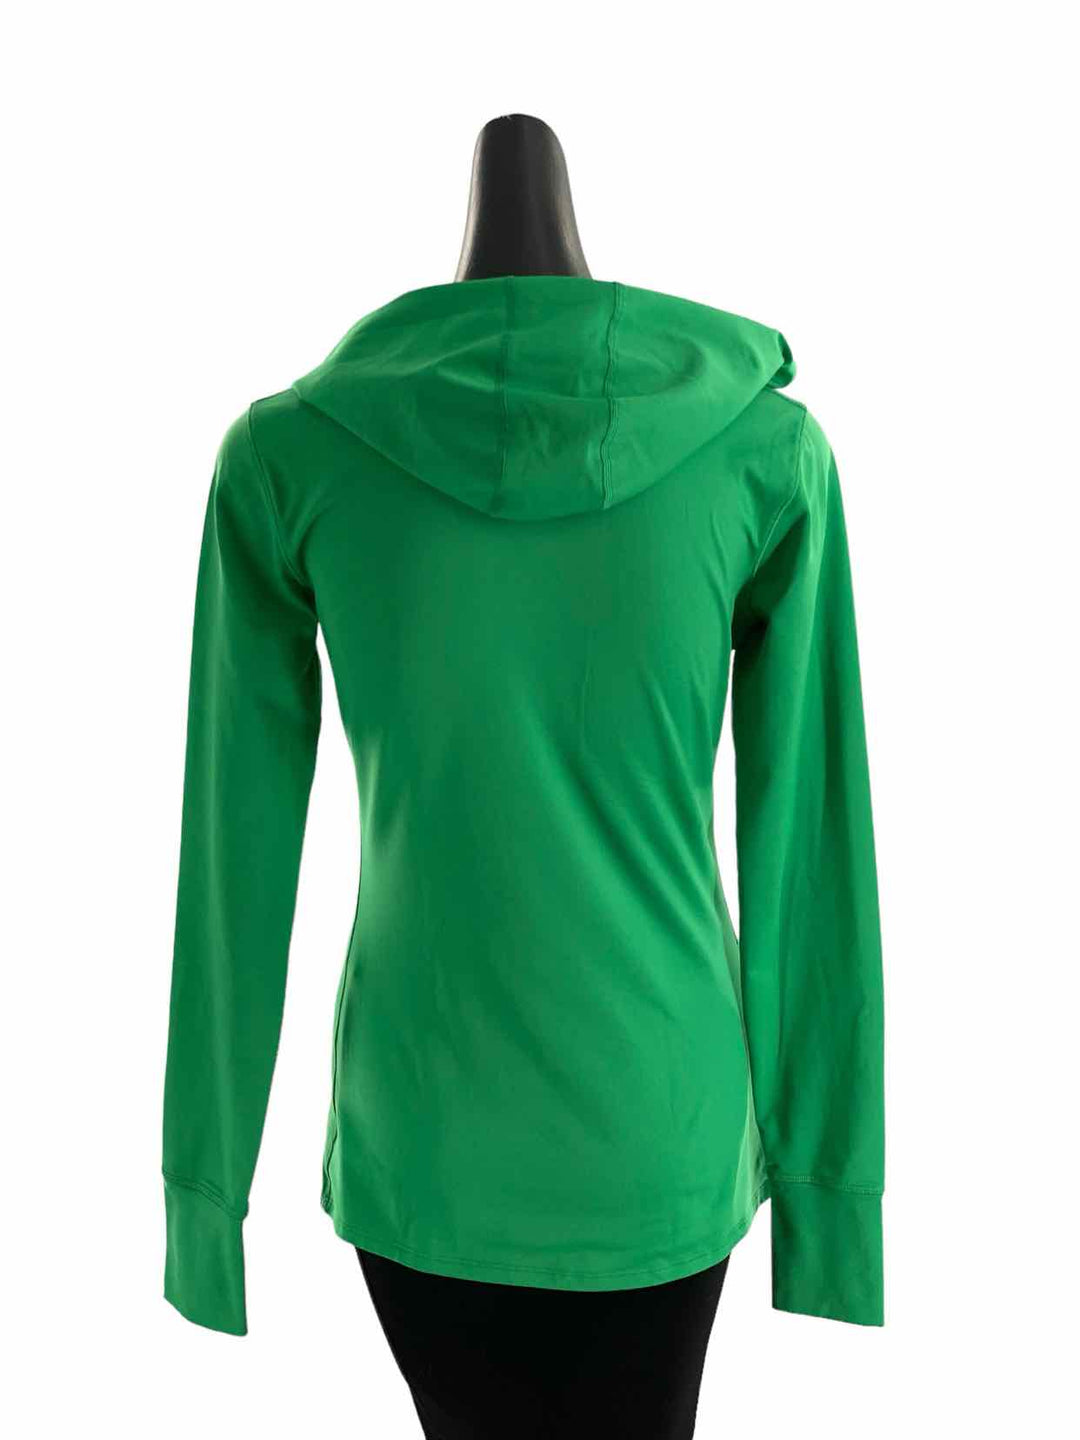 Under Armour Size M Green Athletic Long Sleeve